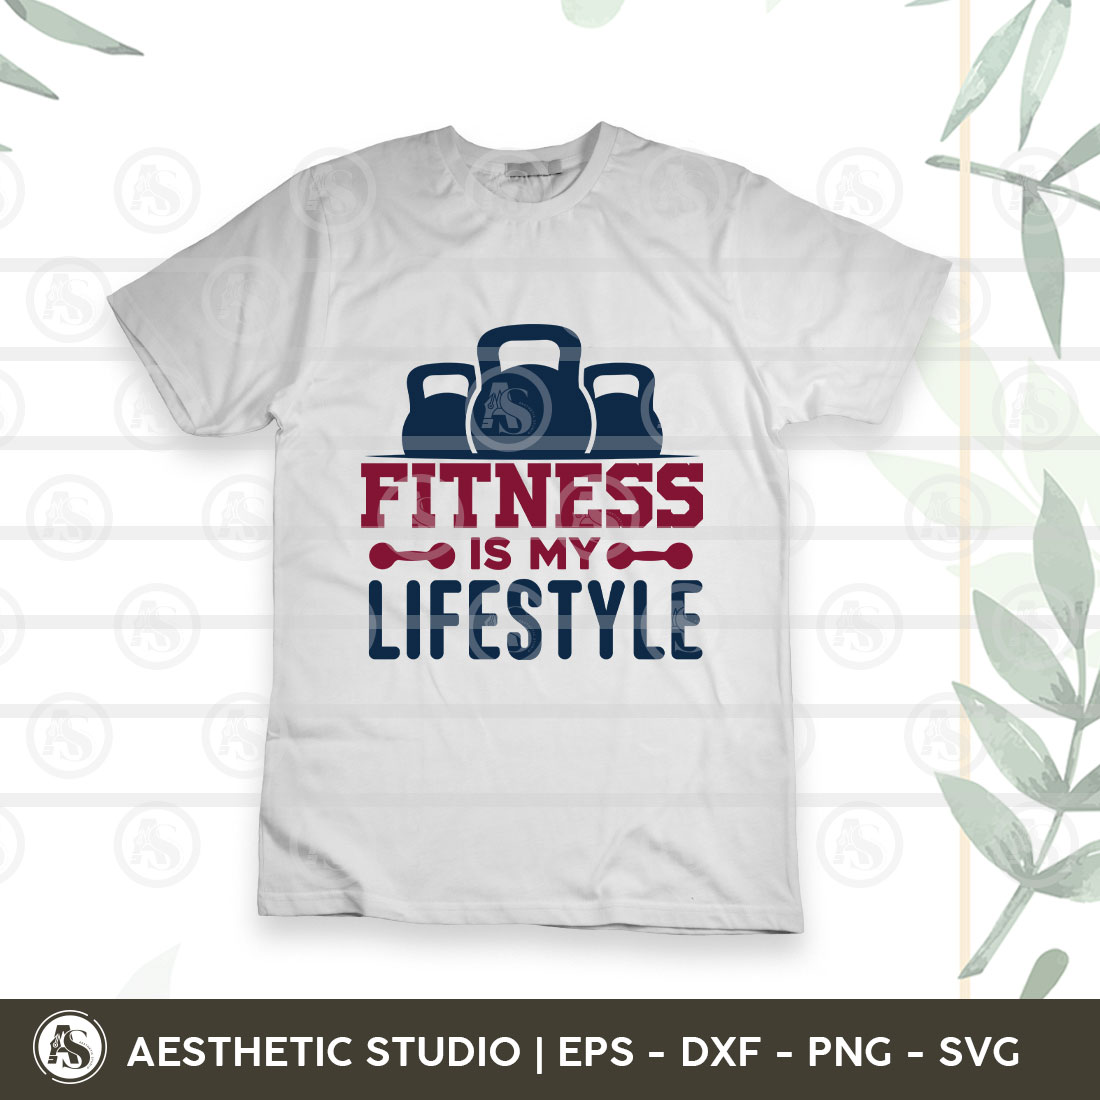 Gym Svg, Fitness Is My Lifestyle Svg, Gym Shirt, Gift For Gym Lover, Workout, Fitness, Weights, Gym Png Cut Files, Dxf, Eps, preview image.